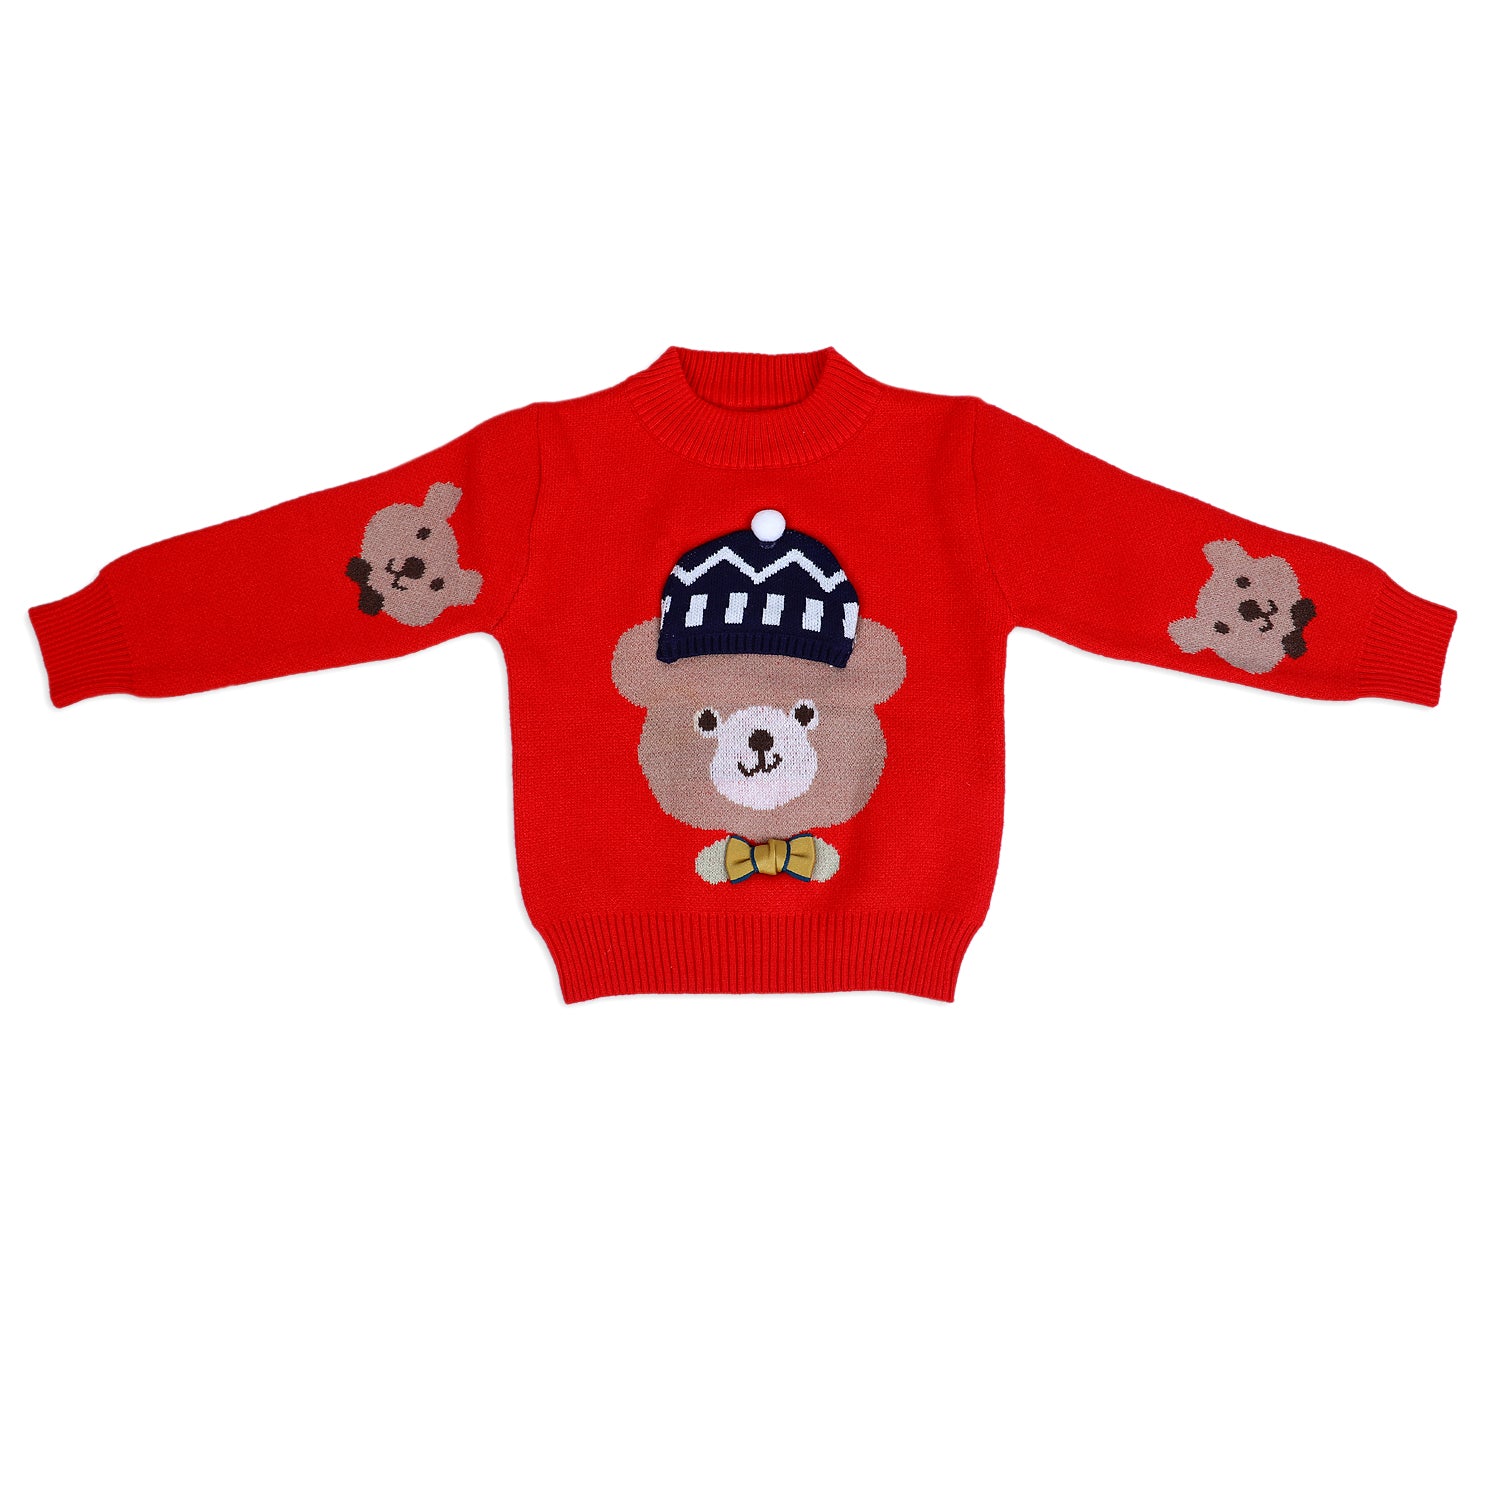 Mr. Bear Premium Full Sleeves Knitted Sweater With 3D Applique - Red - Baby Moo